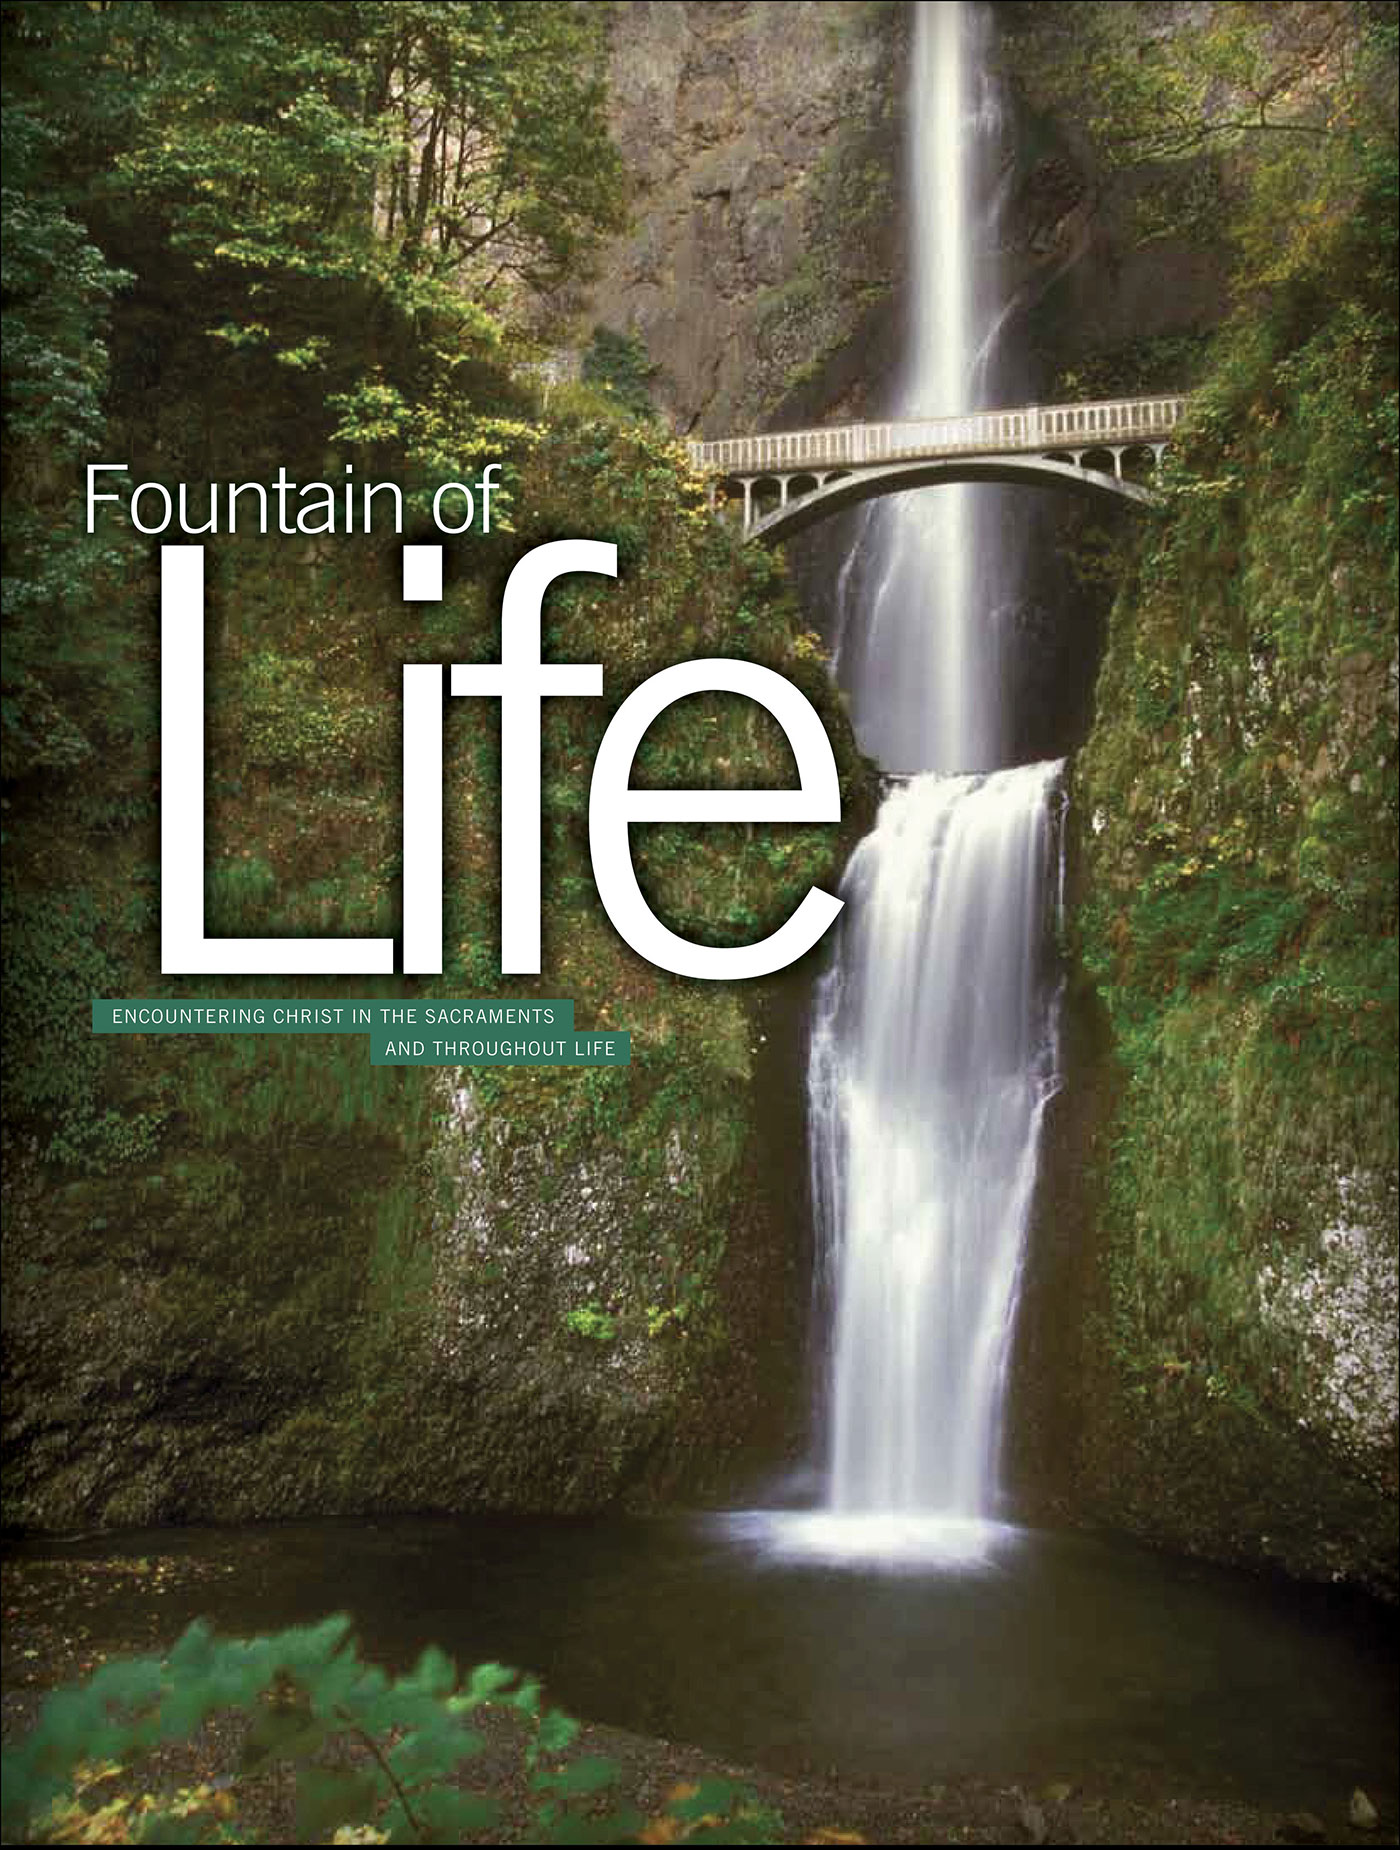 Fountain of LIfe